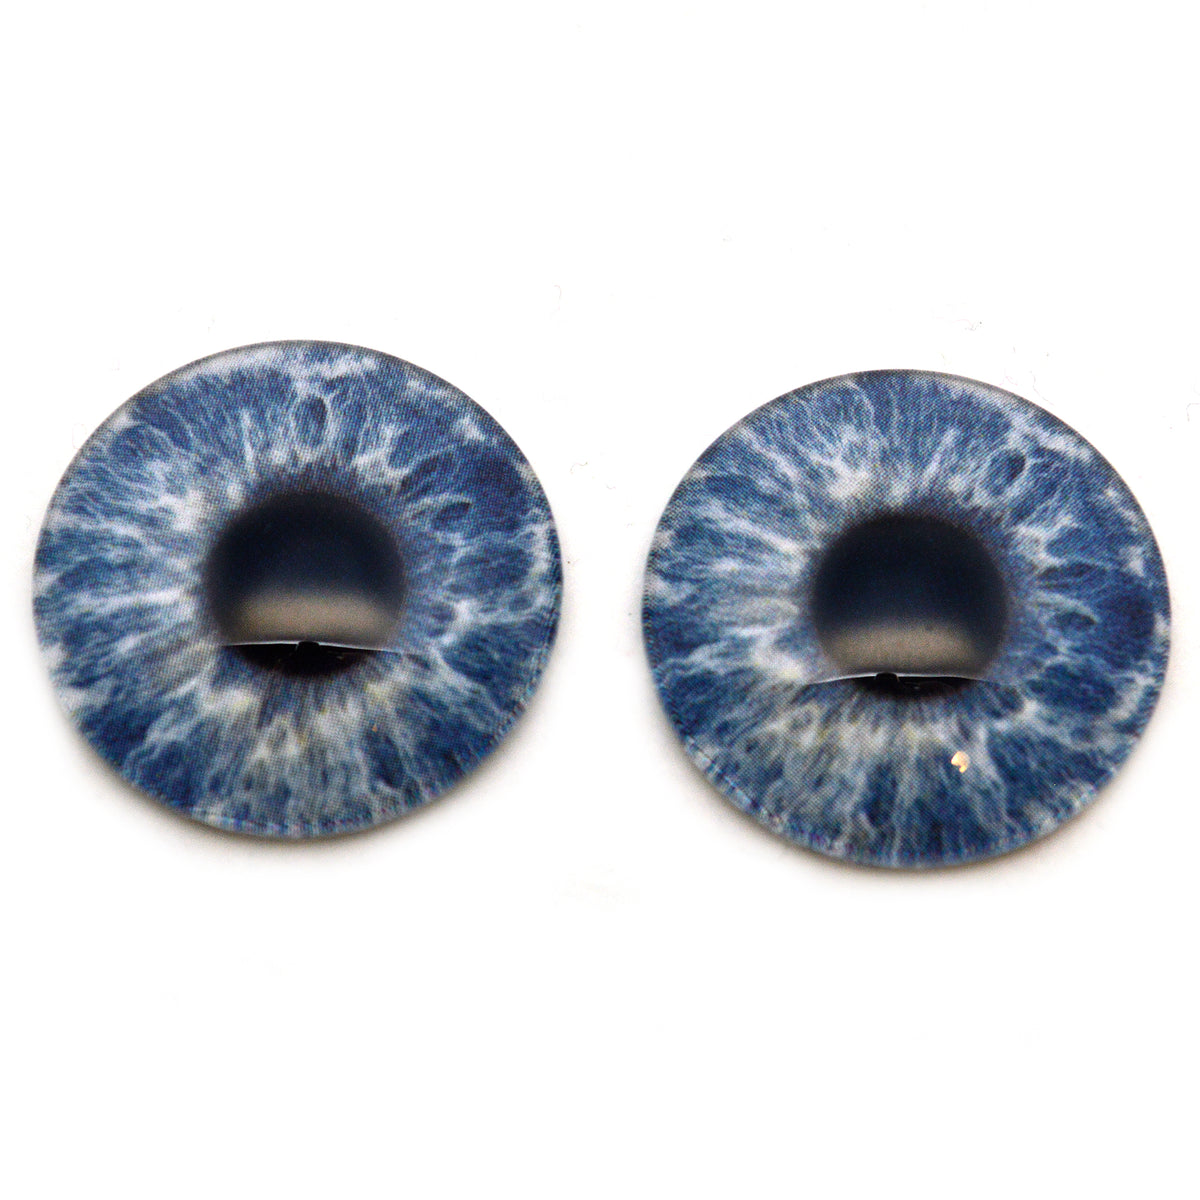 18mm Mouth Blown Glass Eyes - Bright Blue Gray